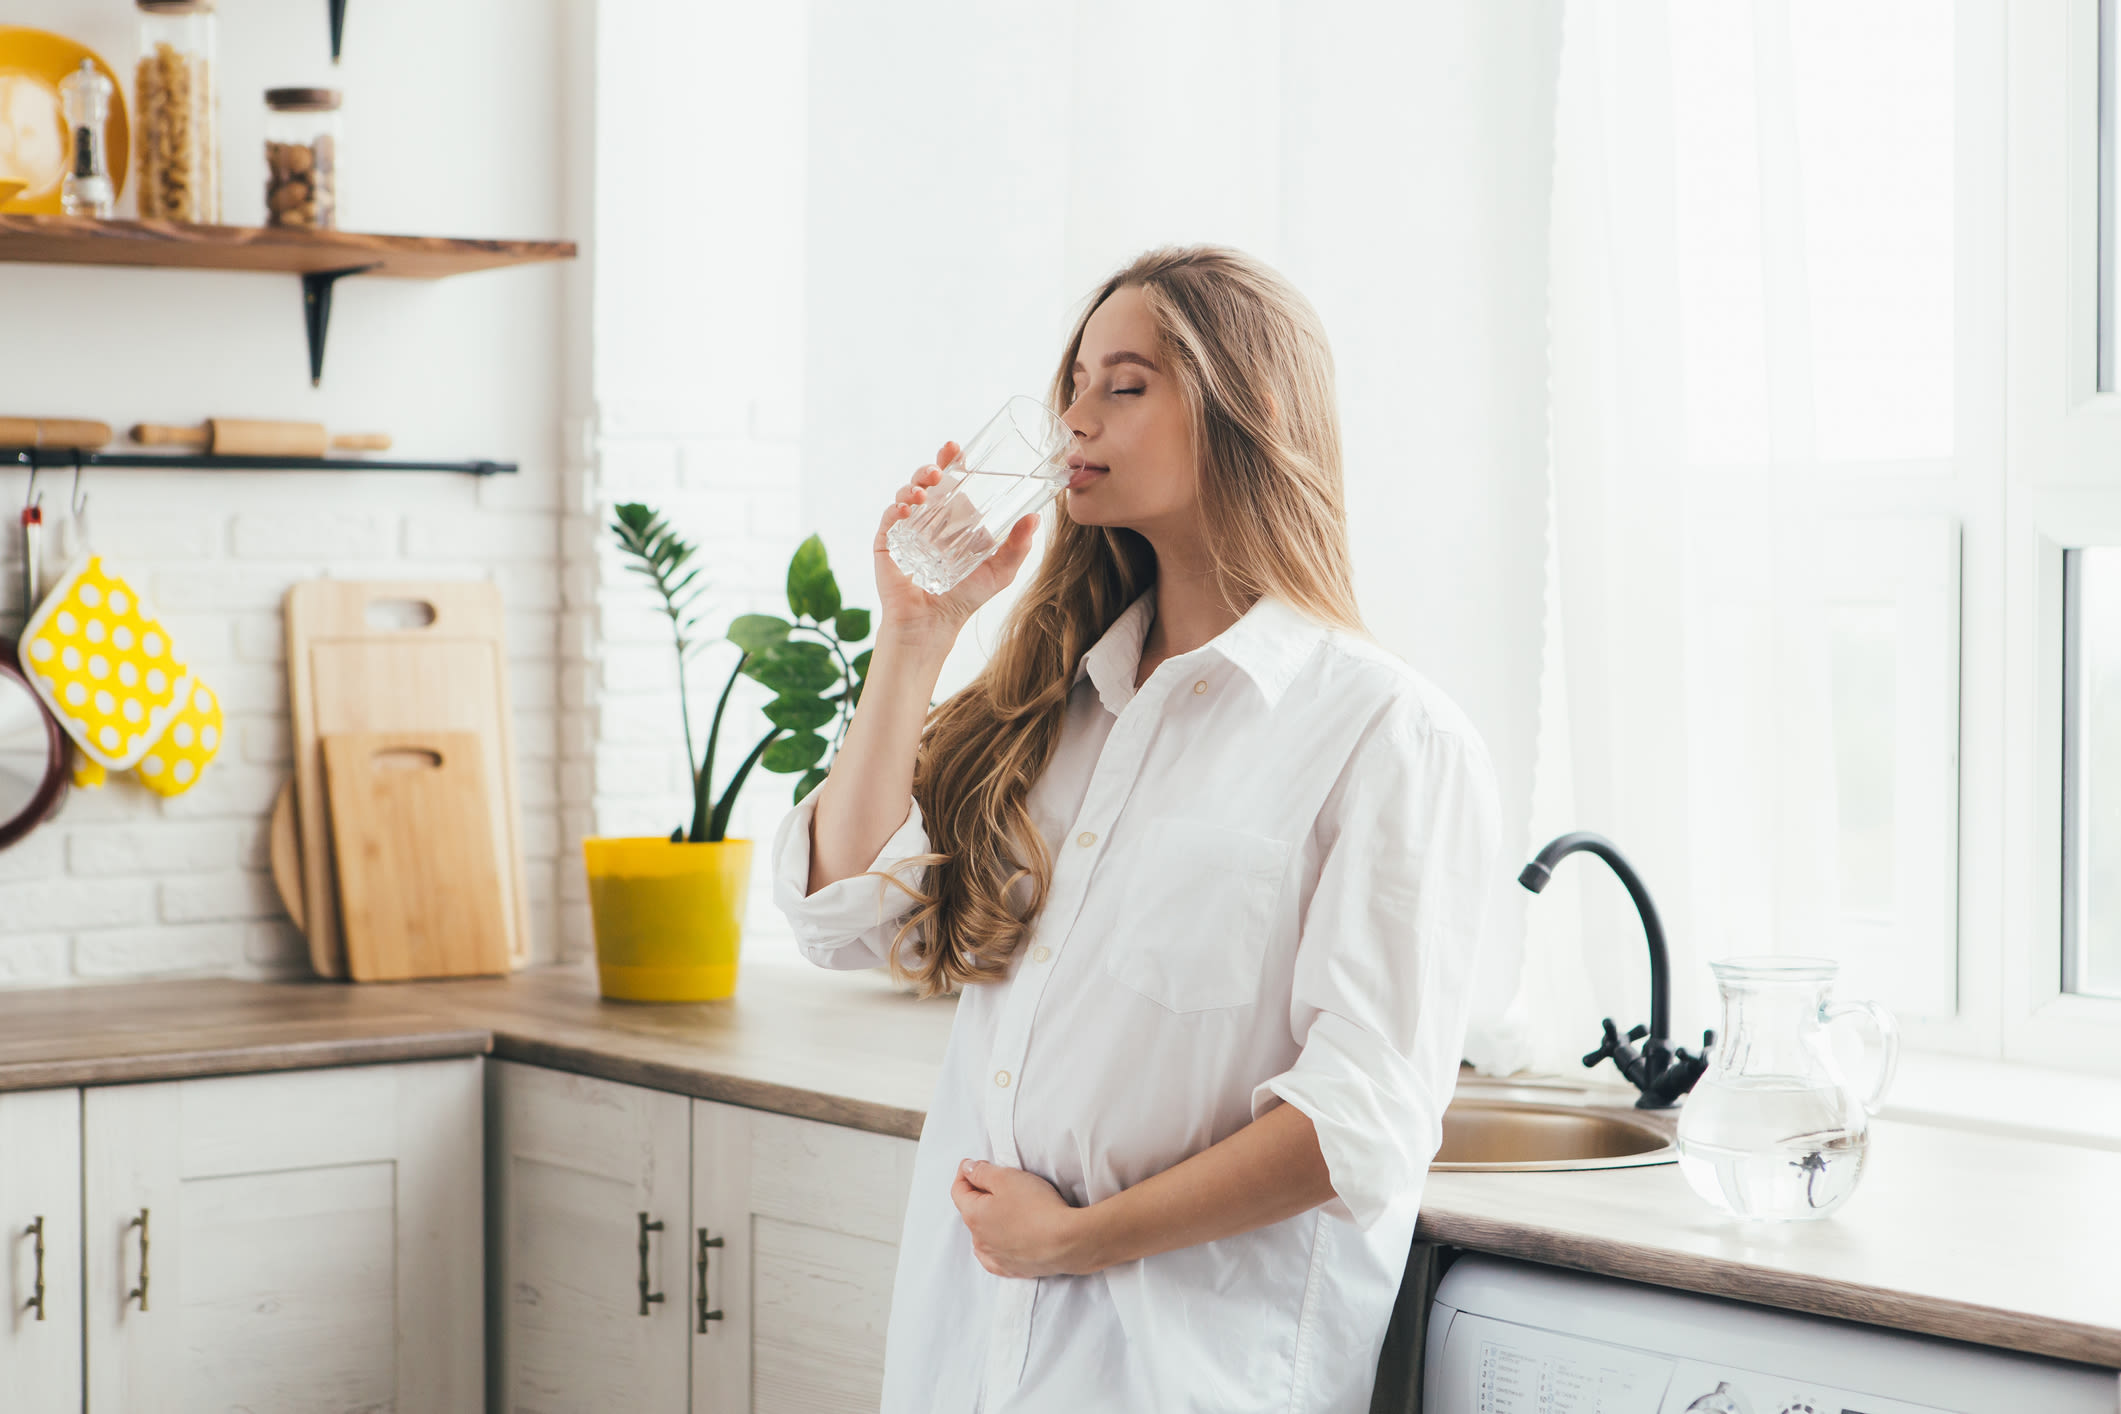 Scientists sound alarm over drinking tap water when pregnant